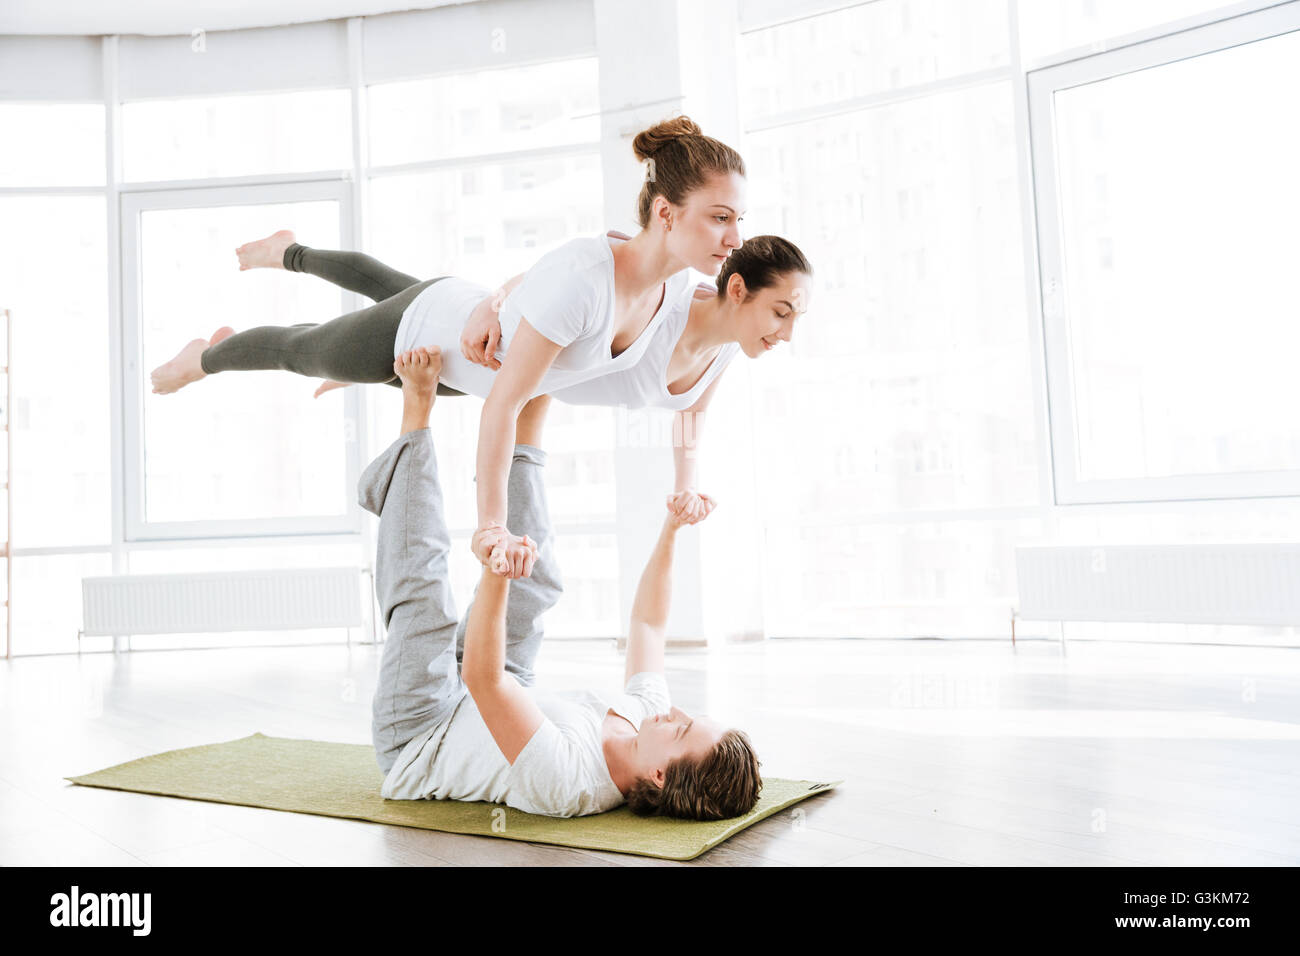 Group of two young women and man balancing and doing acro yoga in studio Stock Photo